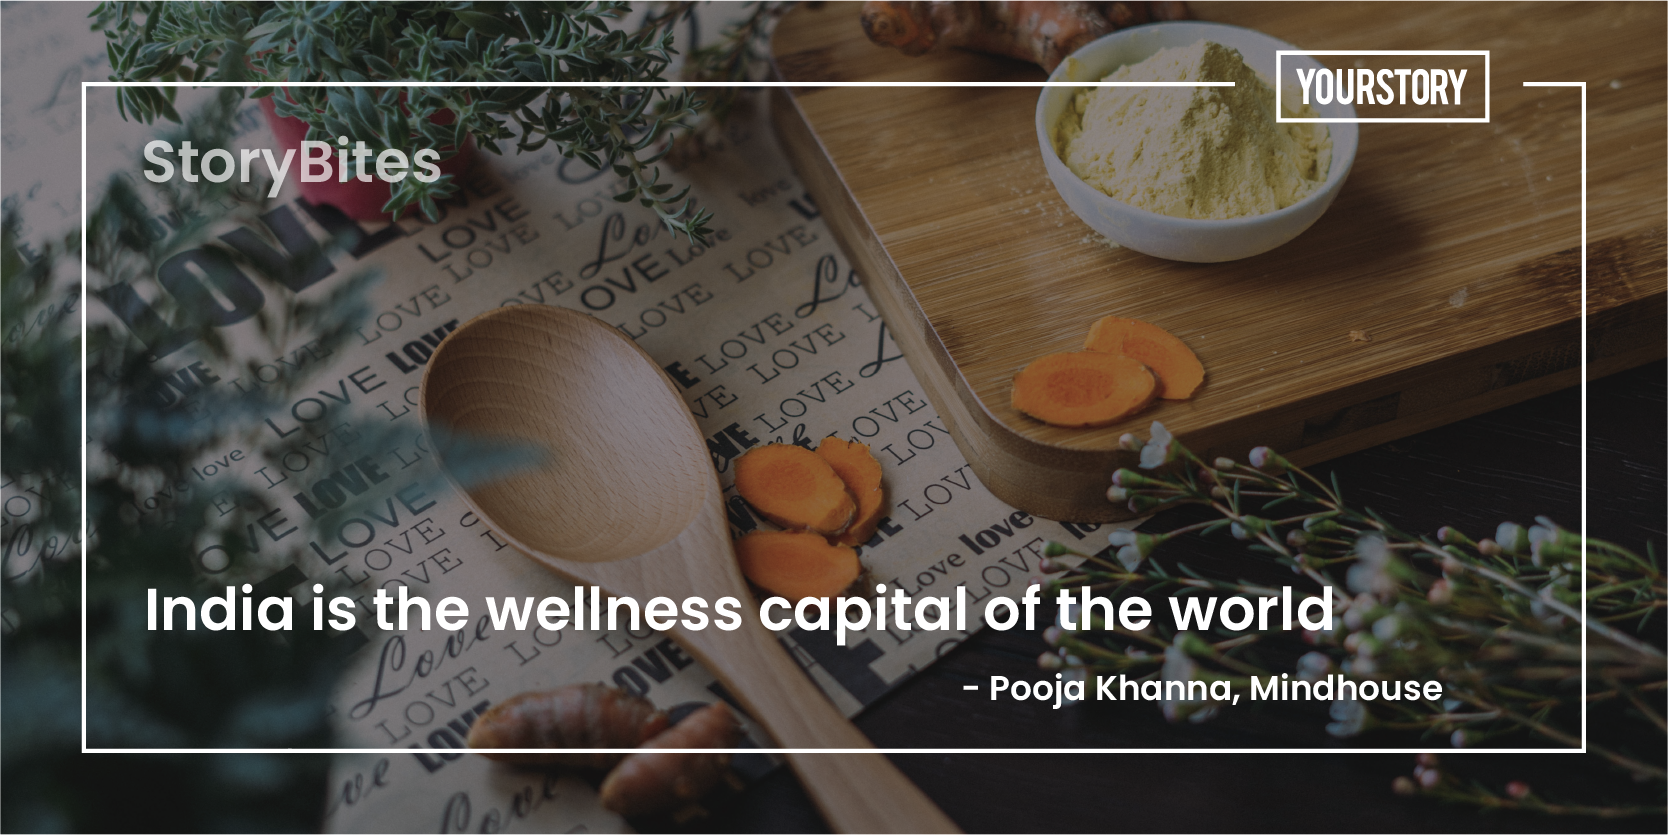 ‘India is the wellness capital of the world’ – 40 quotes of the week on the India business opportunity